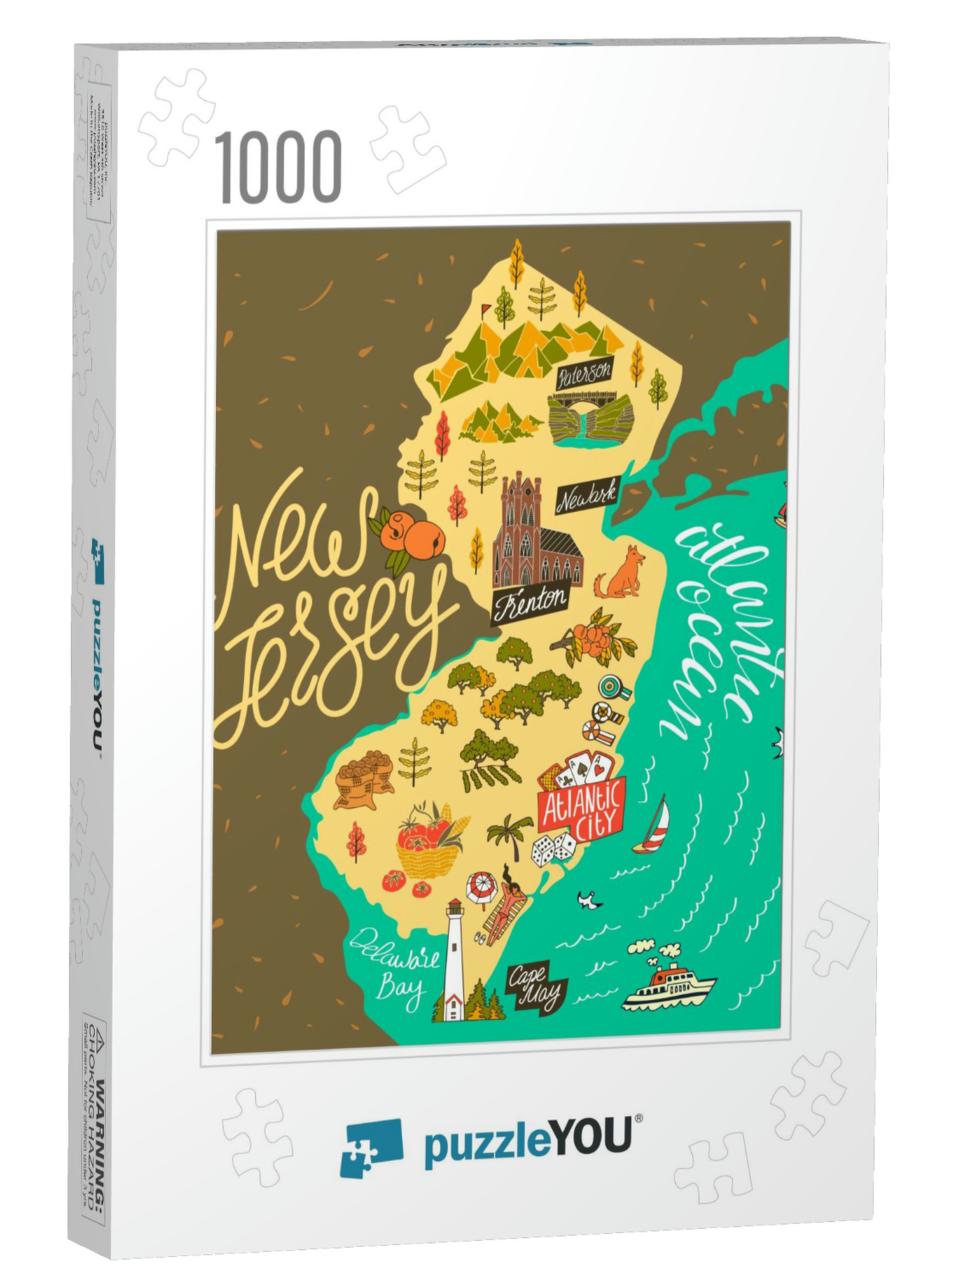 Illustrated Map of New Jersey, Usa. Travel & Attractions... Jigsaw Puzzle with 1000 pieces